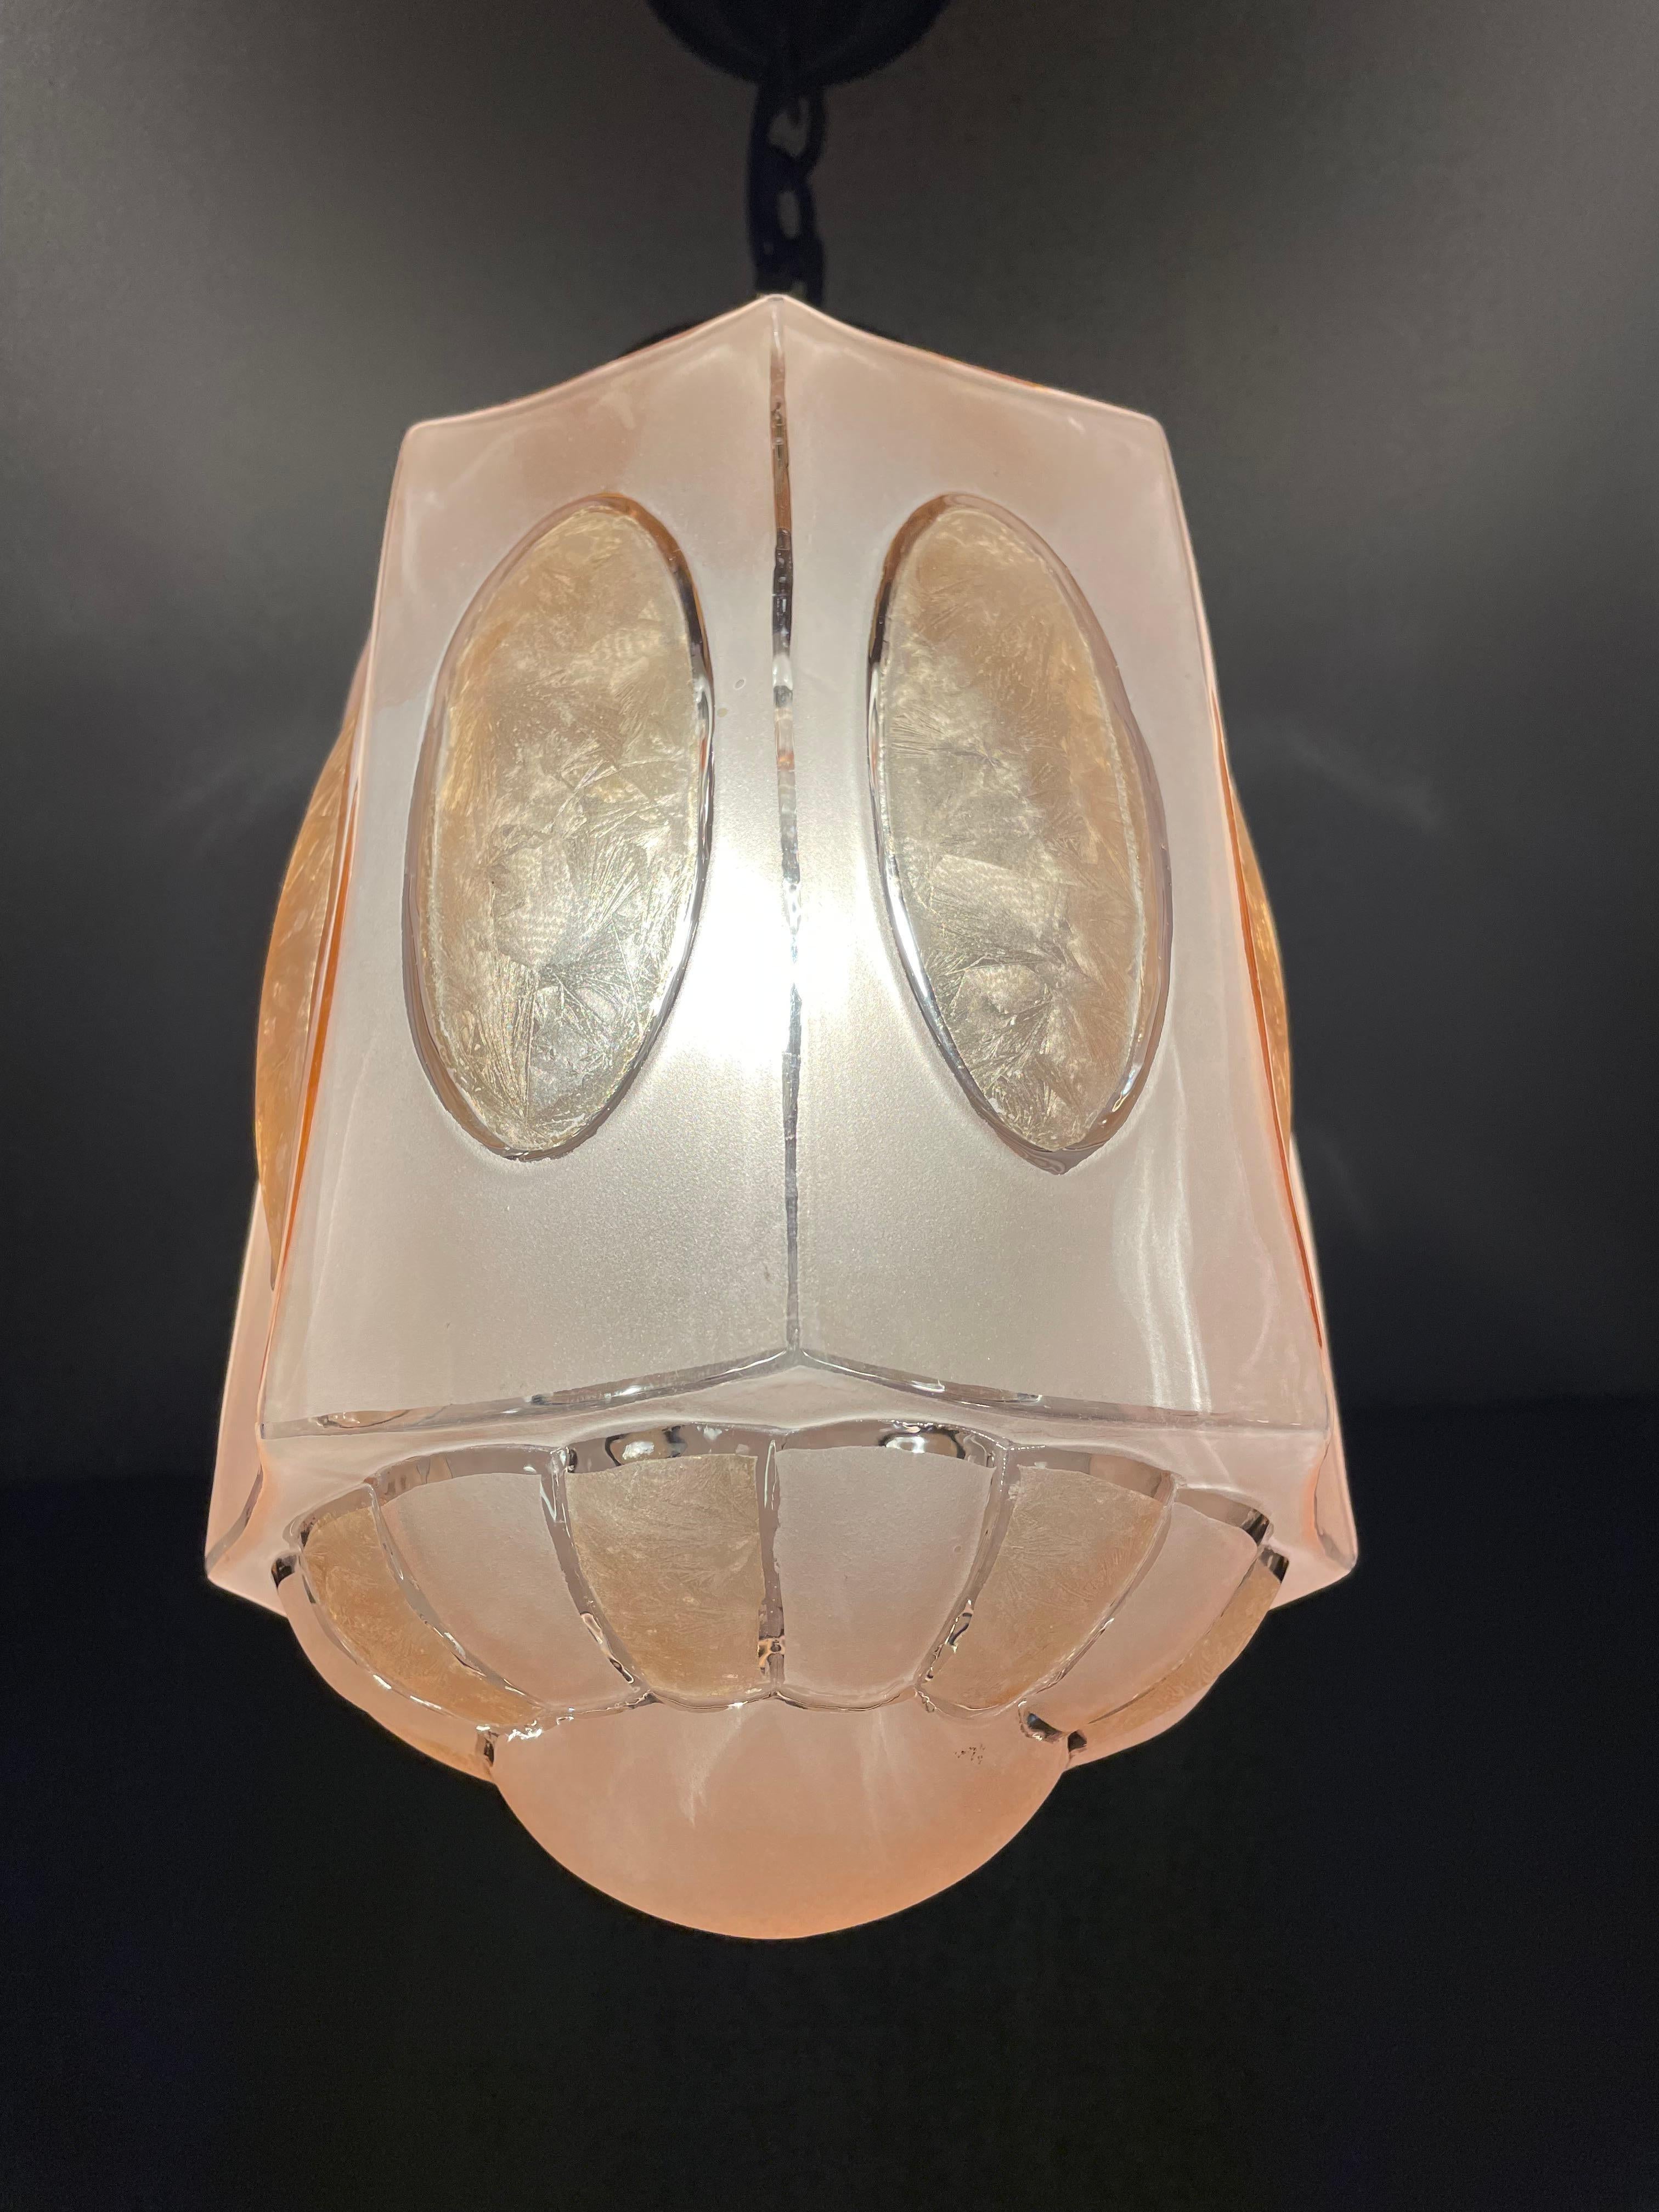 Rare Art Deco Pendant Light Fixture w. Octagonal Satinated & Frosted Glass Shade For Sale 12